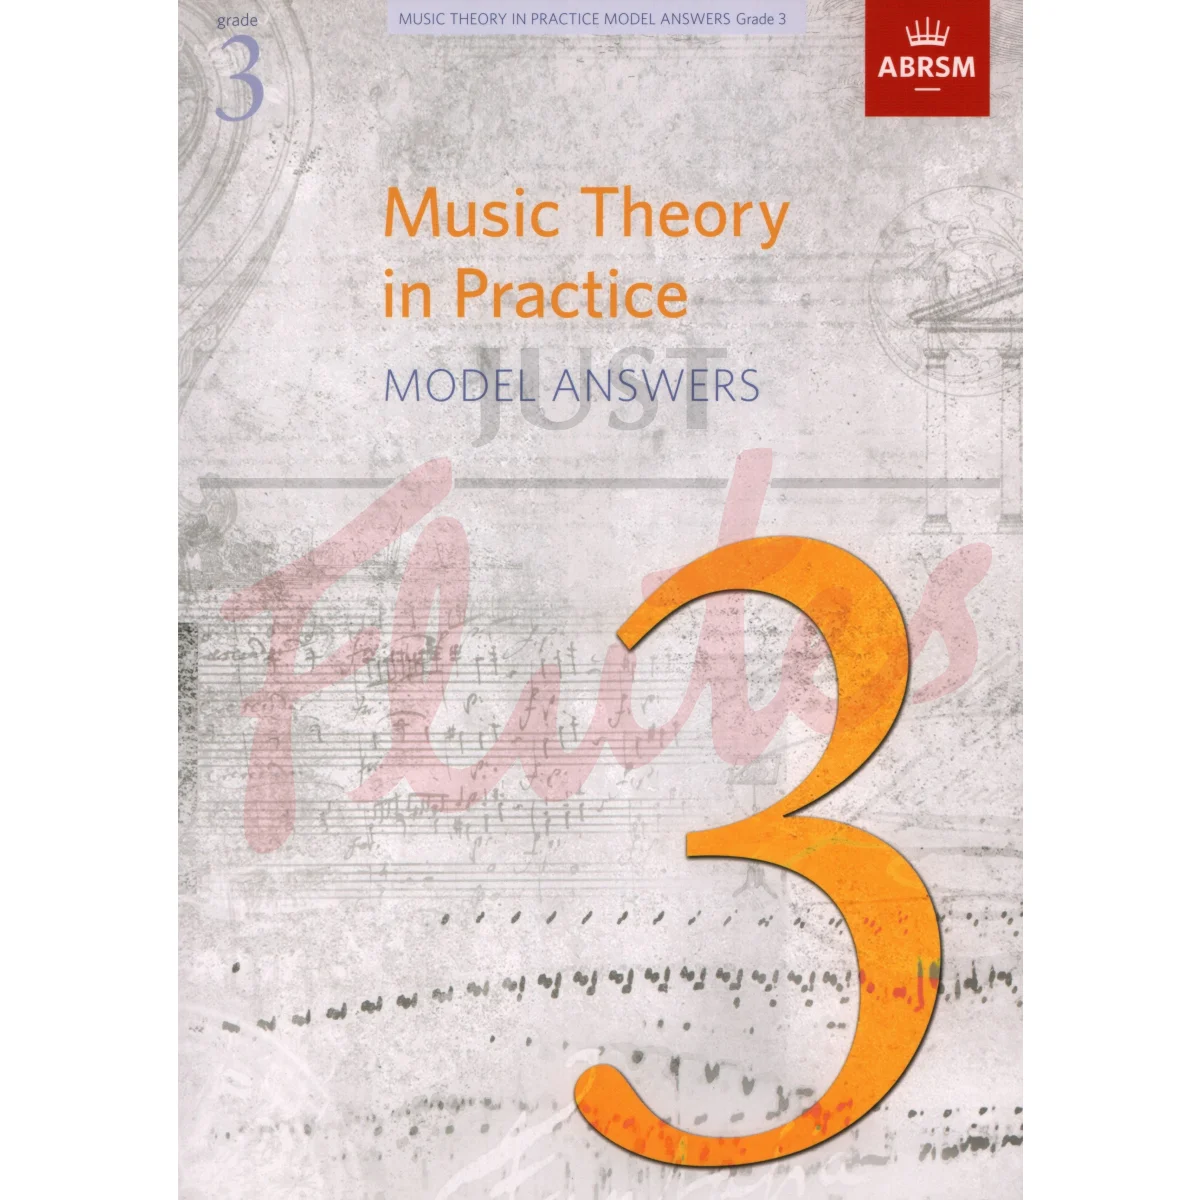 Music Theory in Practice Model Answers - Grade 3